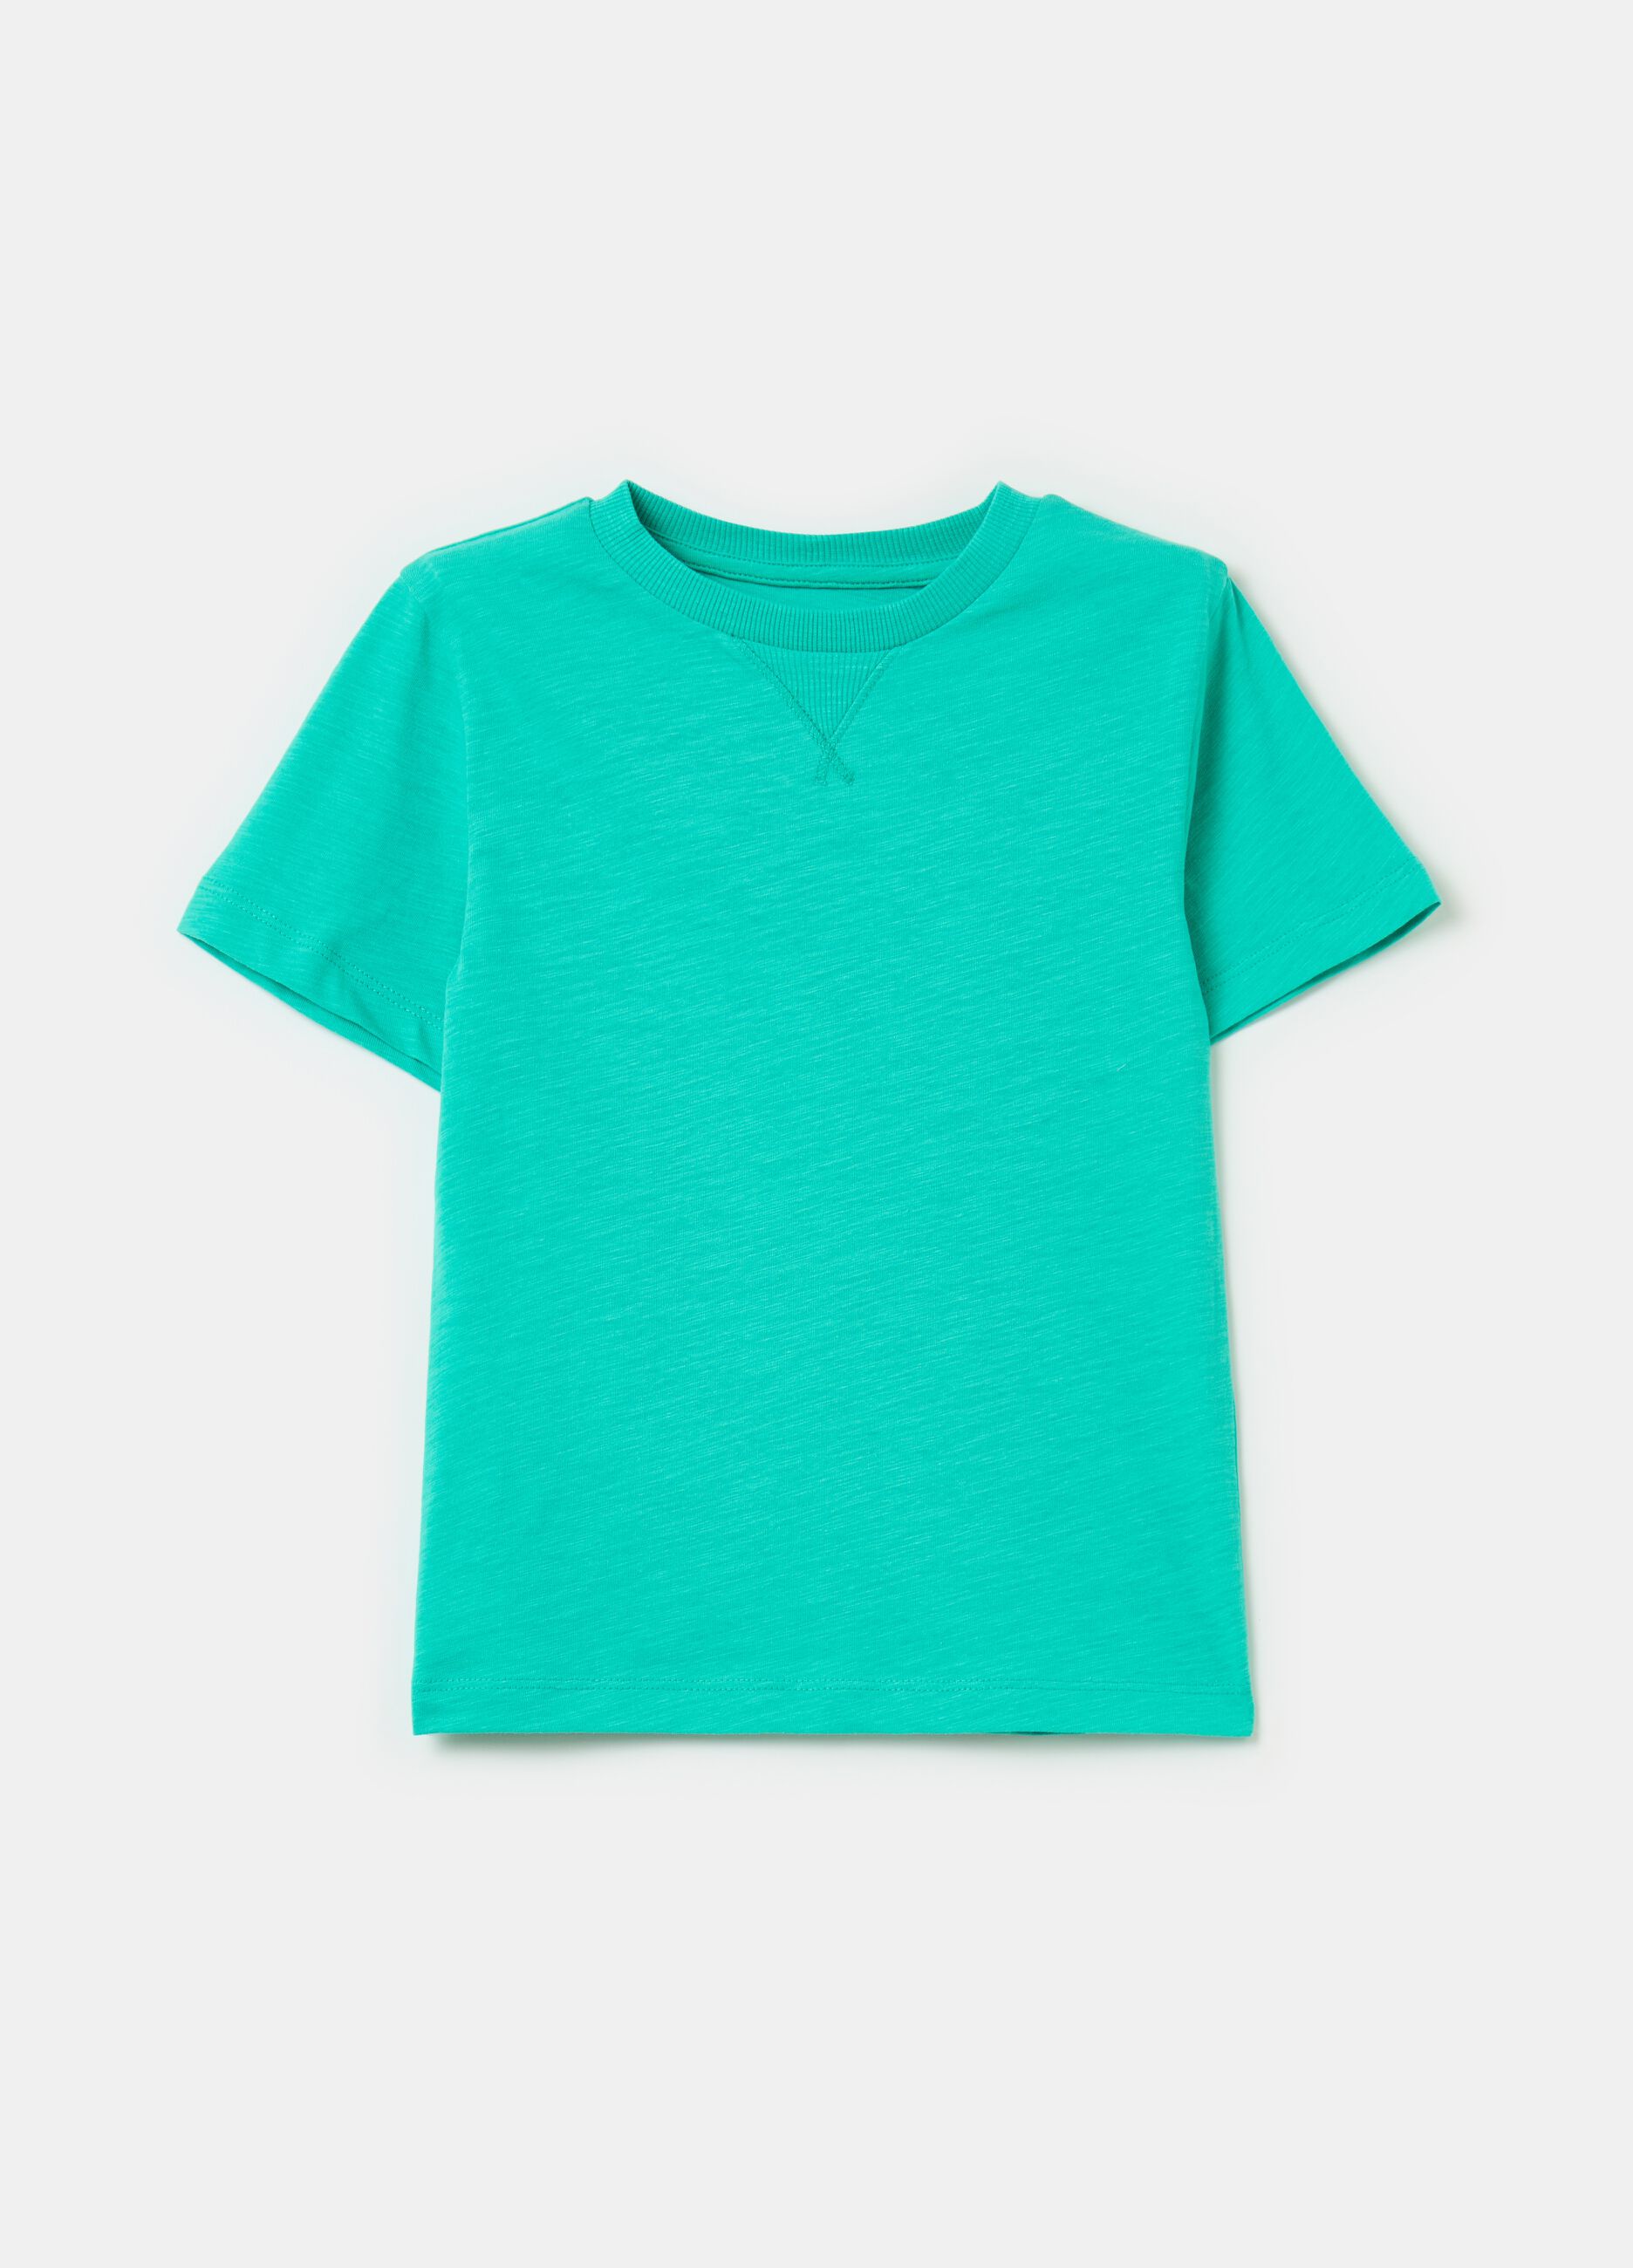 Cotton T-shirt with detail